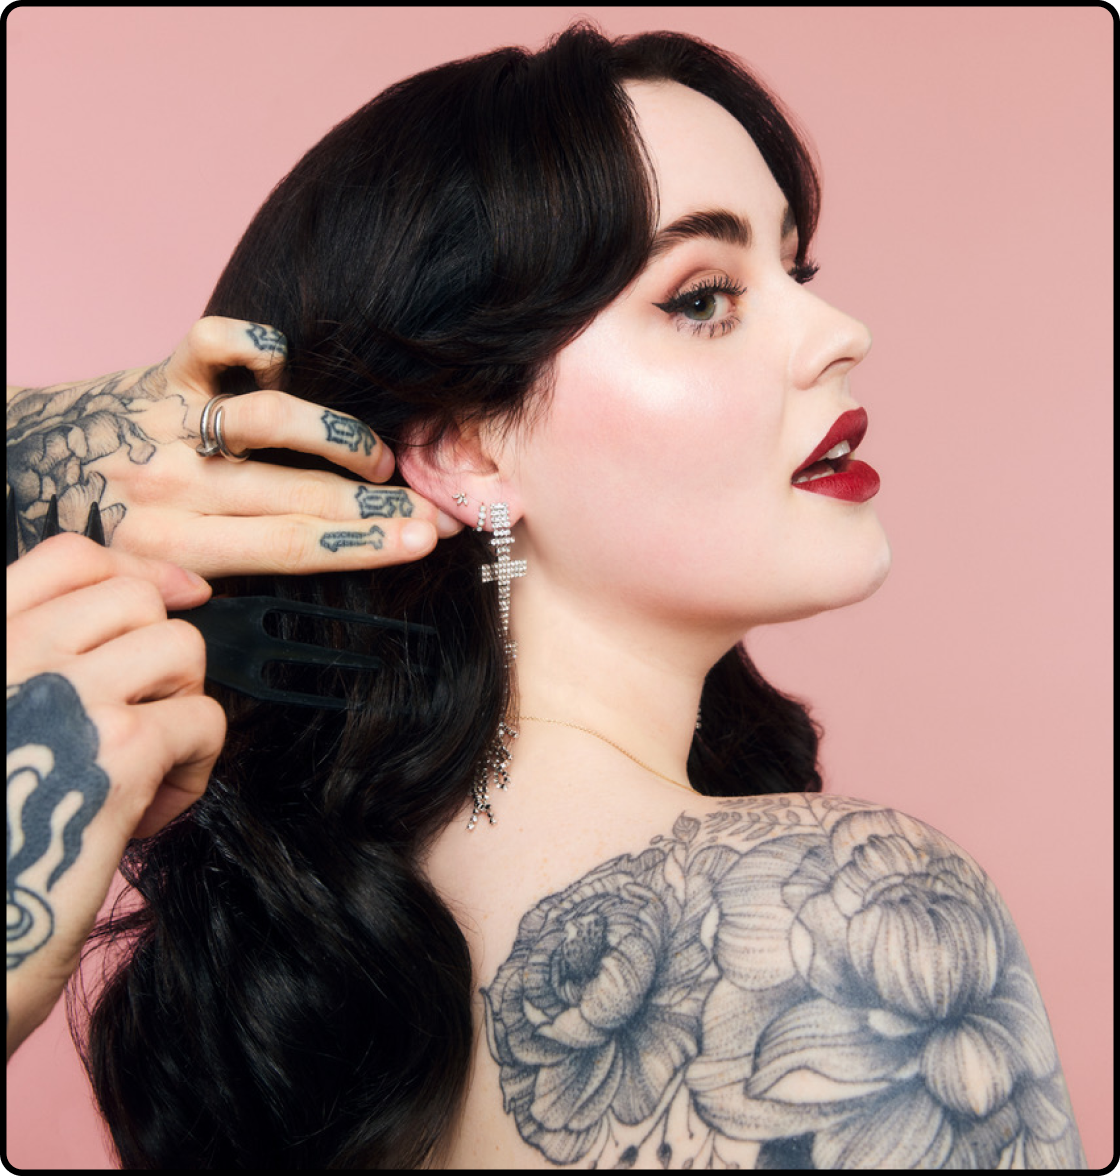 Isabelle Kate wearing red lipstick and black eyeliner, looking over her shoulder. Someone's tattooed hands are holding her hair back, revealing a set of sparkling earrings.